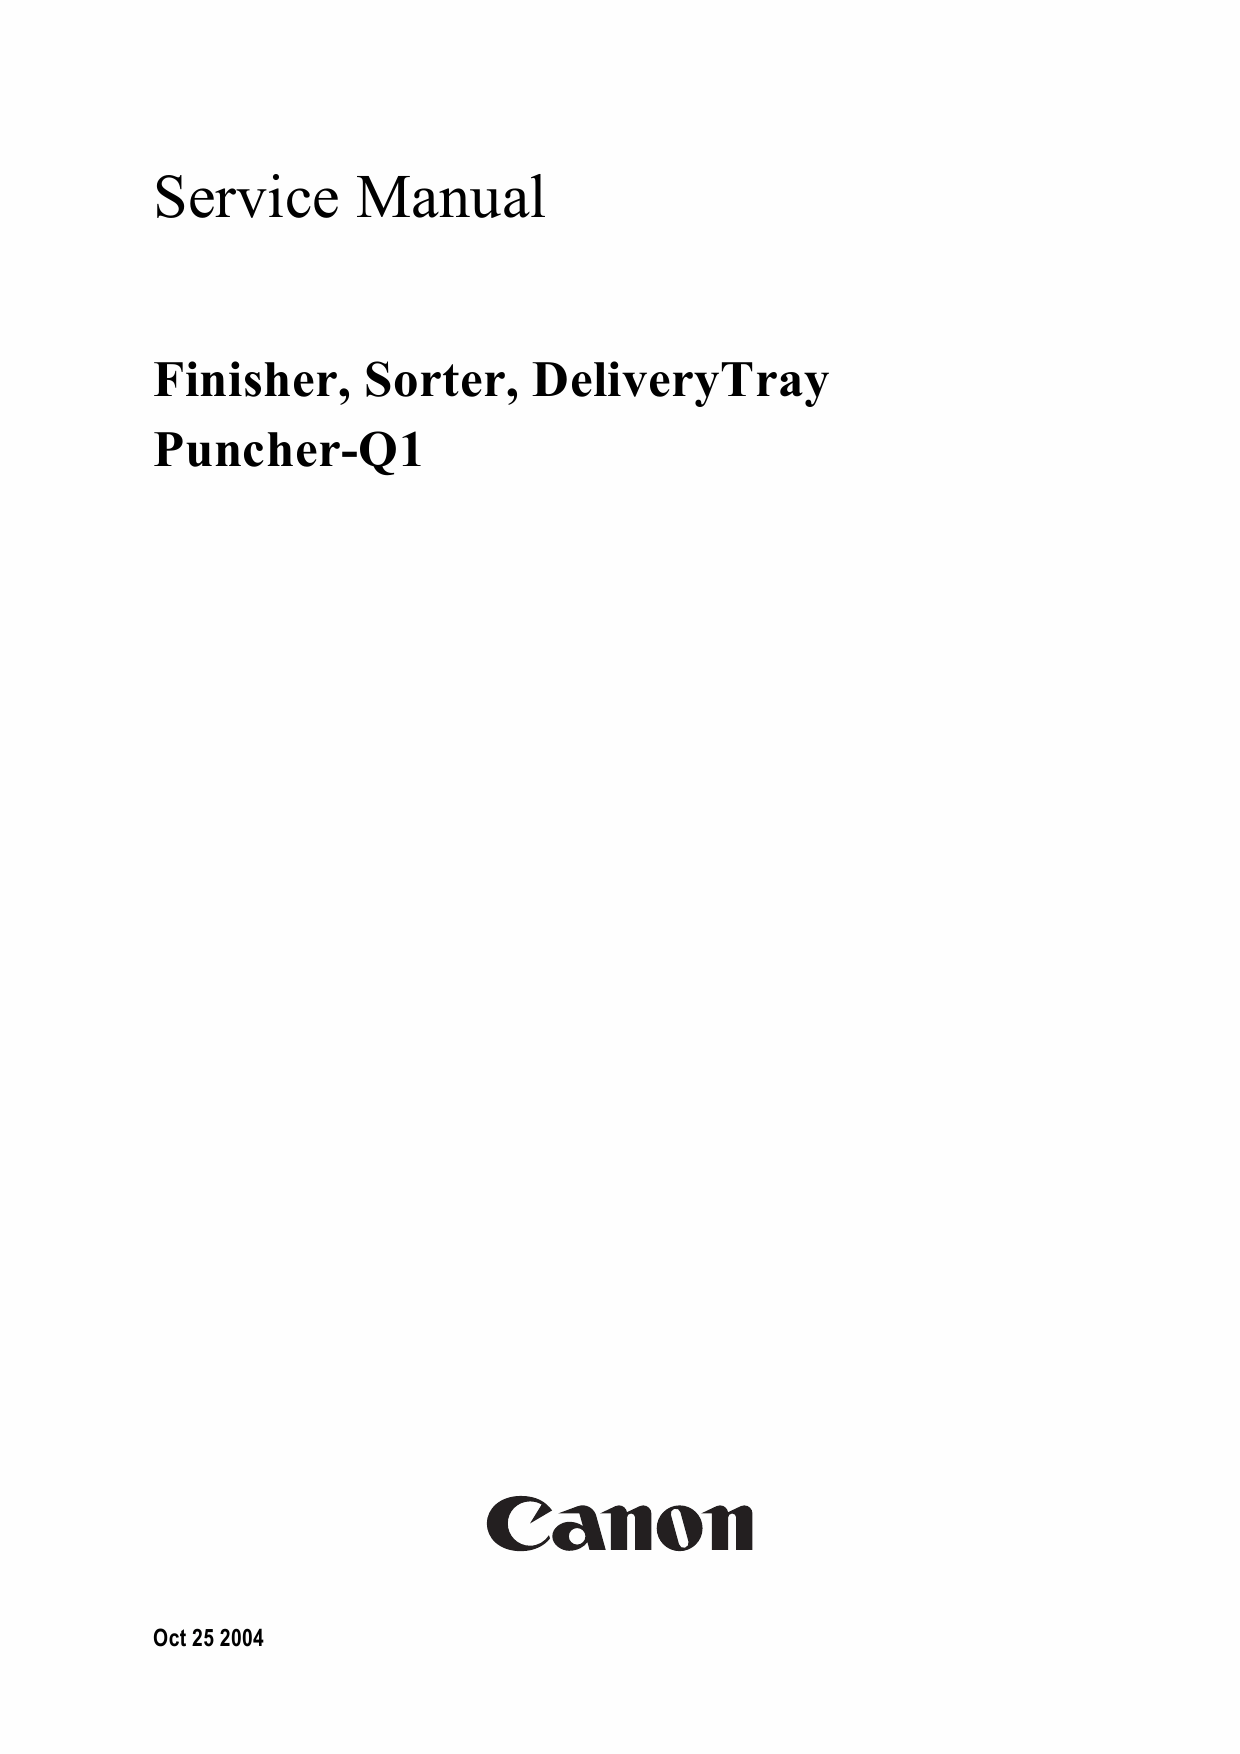 Canon Options Finisher-Q1 Sorter DeliveryTray Puncher Service Manual-1